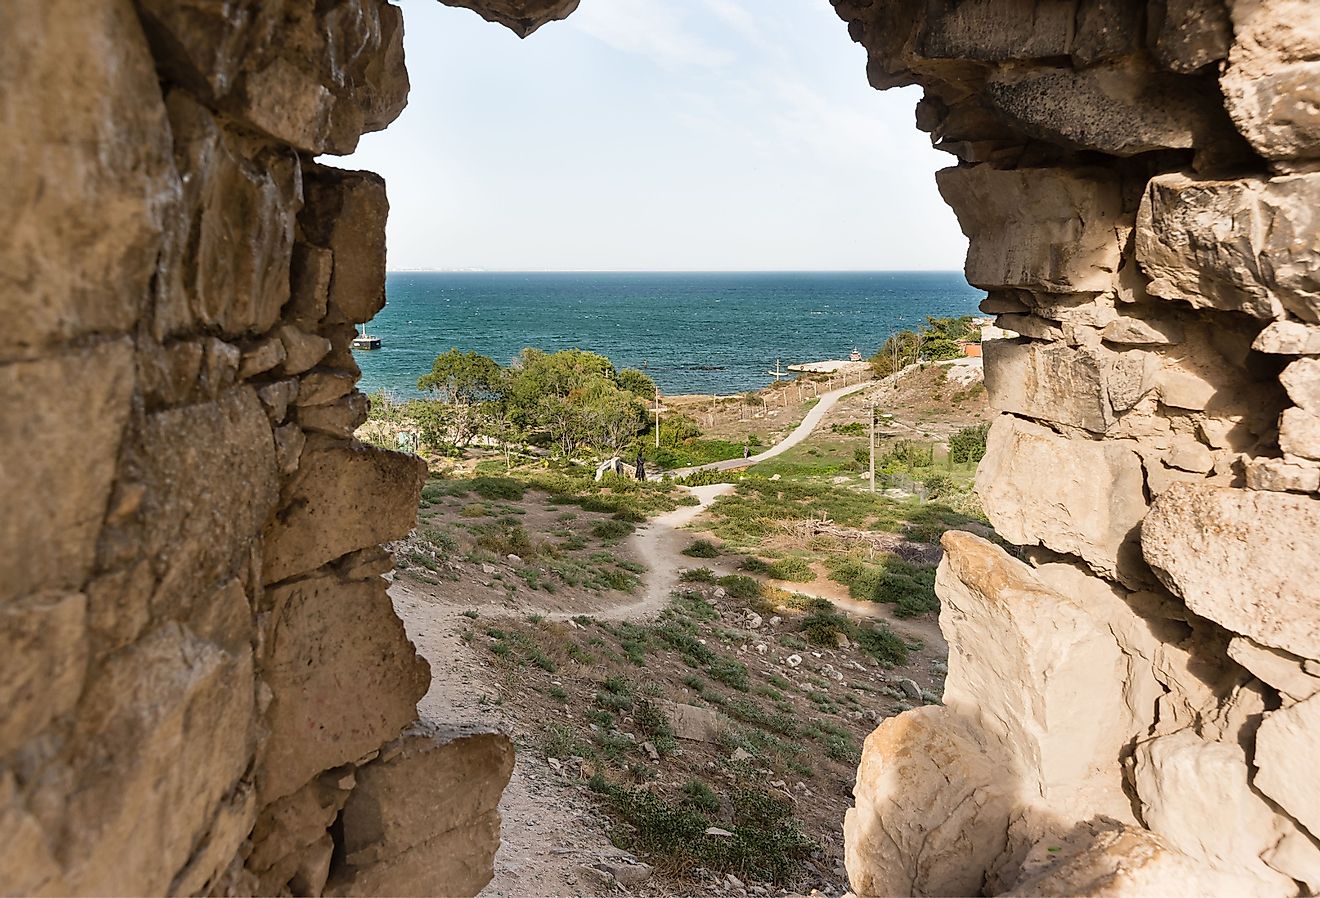 View from the window of the Krisko defensive tower of the medieval fortress of Kafa on the shore of the Gulf of Feodosia. Image credit Garmasheva Natalia via Shutterstock.